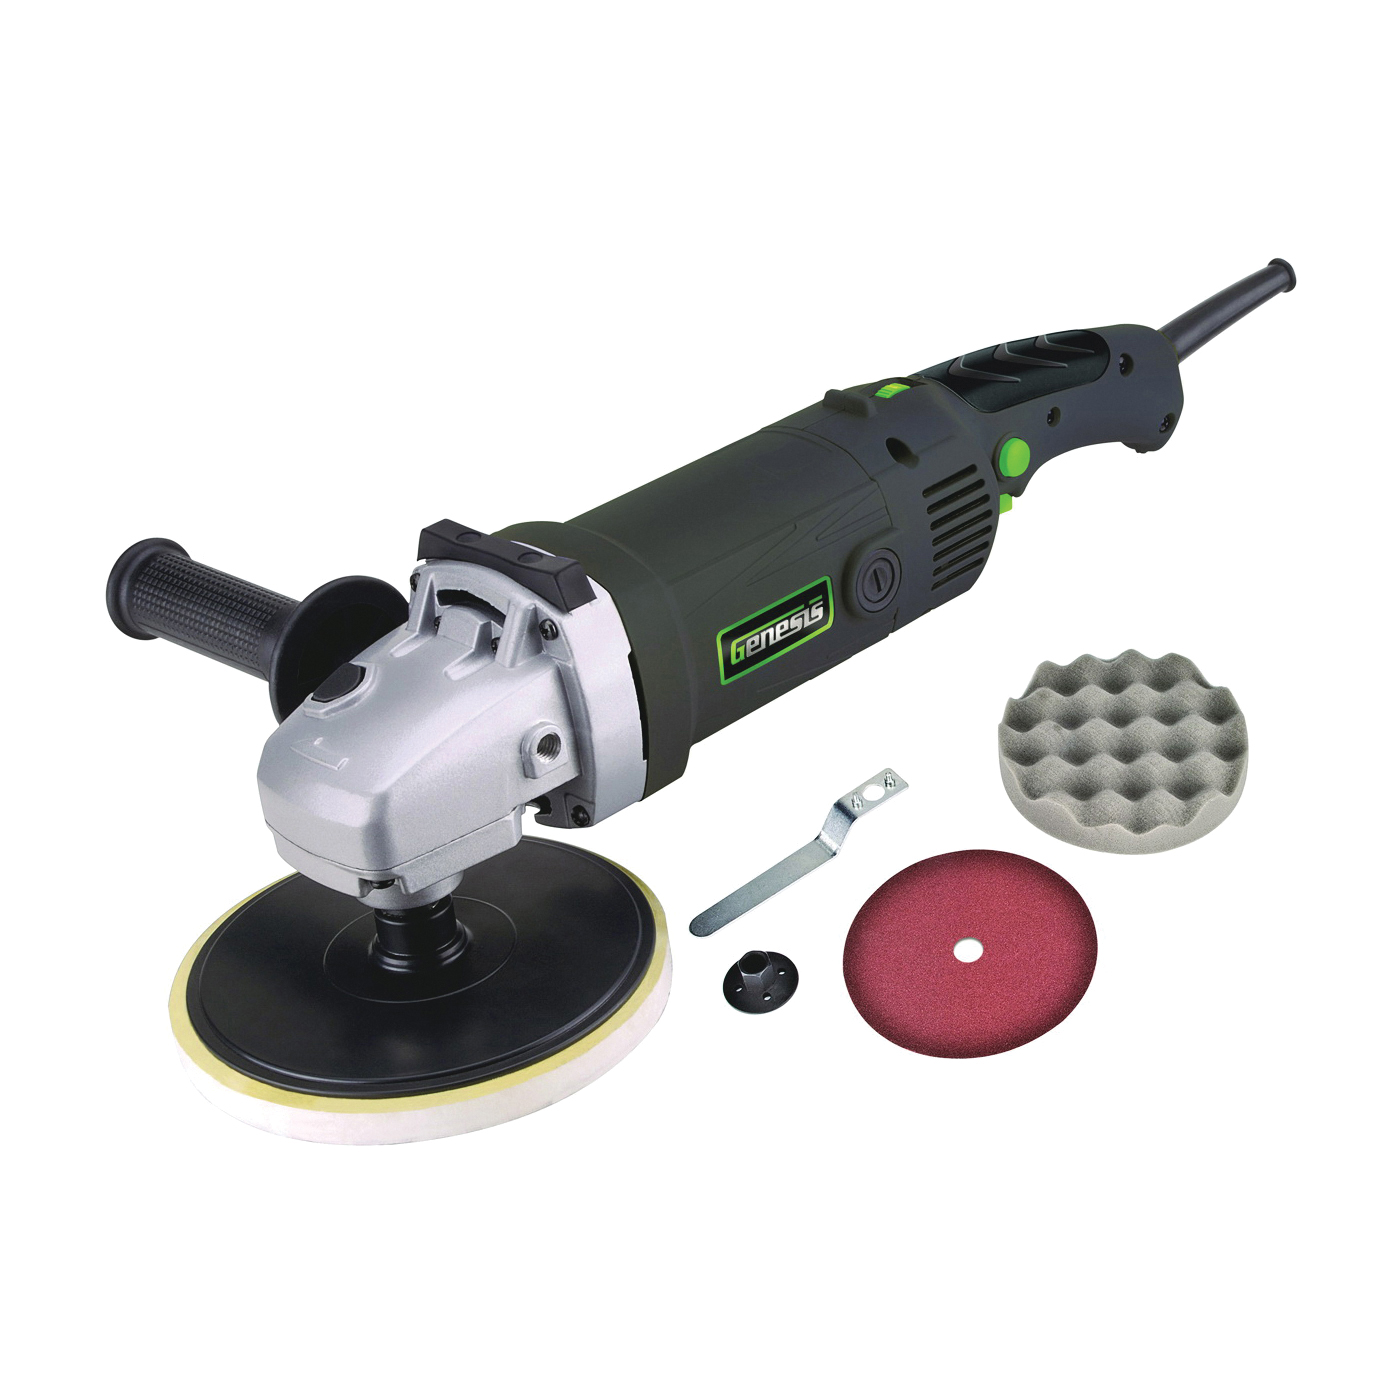 Genesis GSP1711 Variable Speed Sander/Polisher, 11 A, 5/8-11 UNC Spindle, 600 to 3000 rpm Speed, Auxiliary Handle - 2